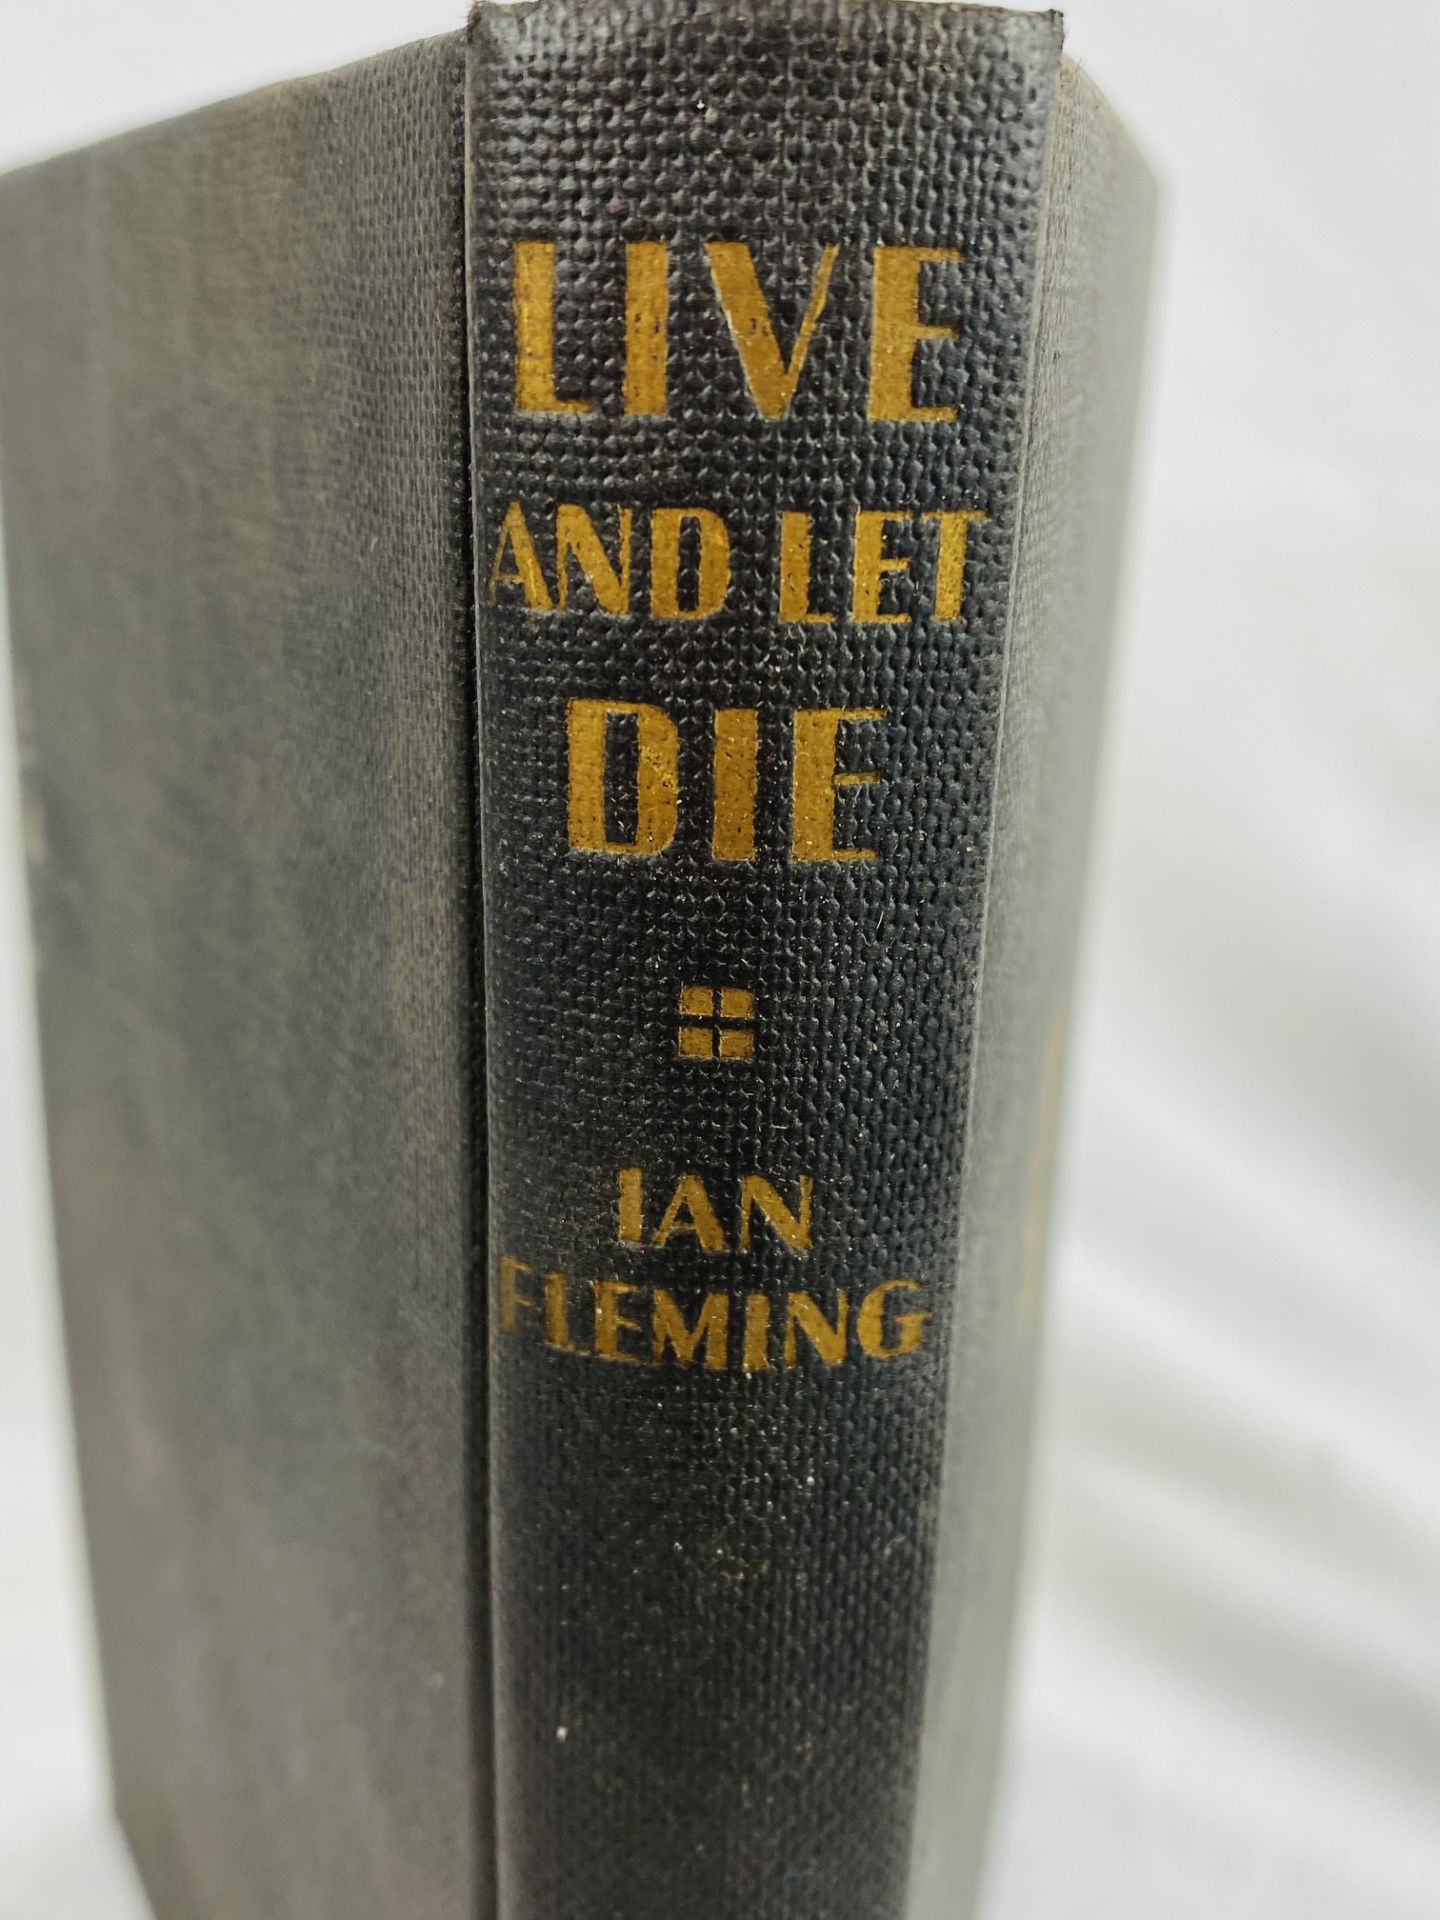 Ian Fleming Live & Let Die, first edition, third impression - Image 3 of 6